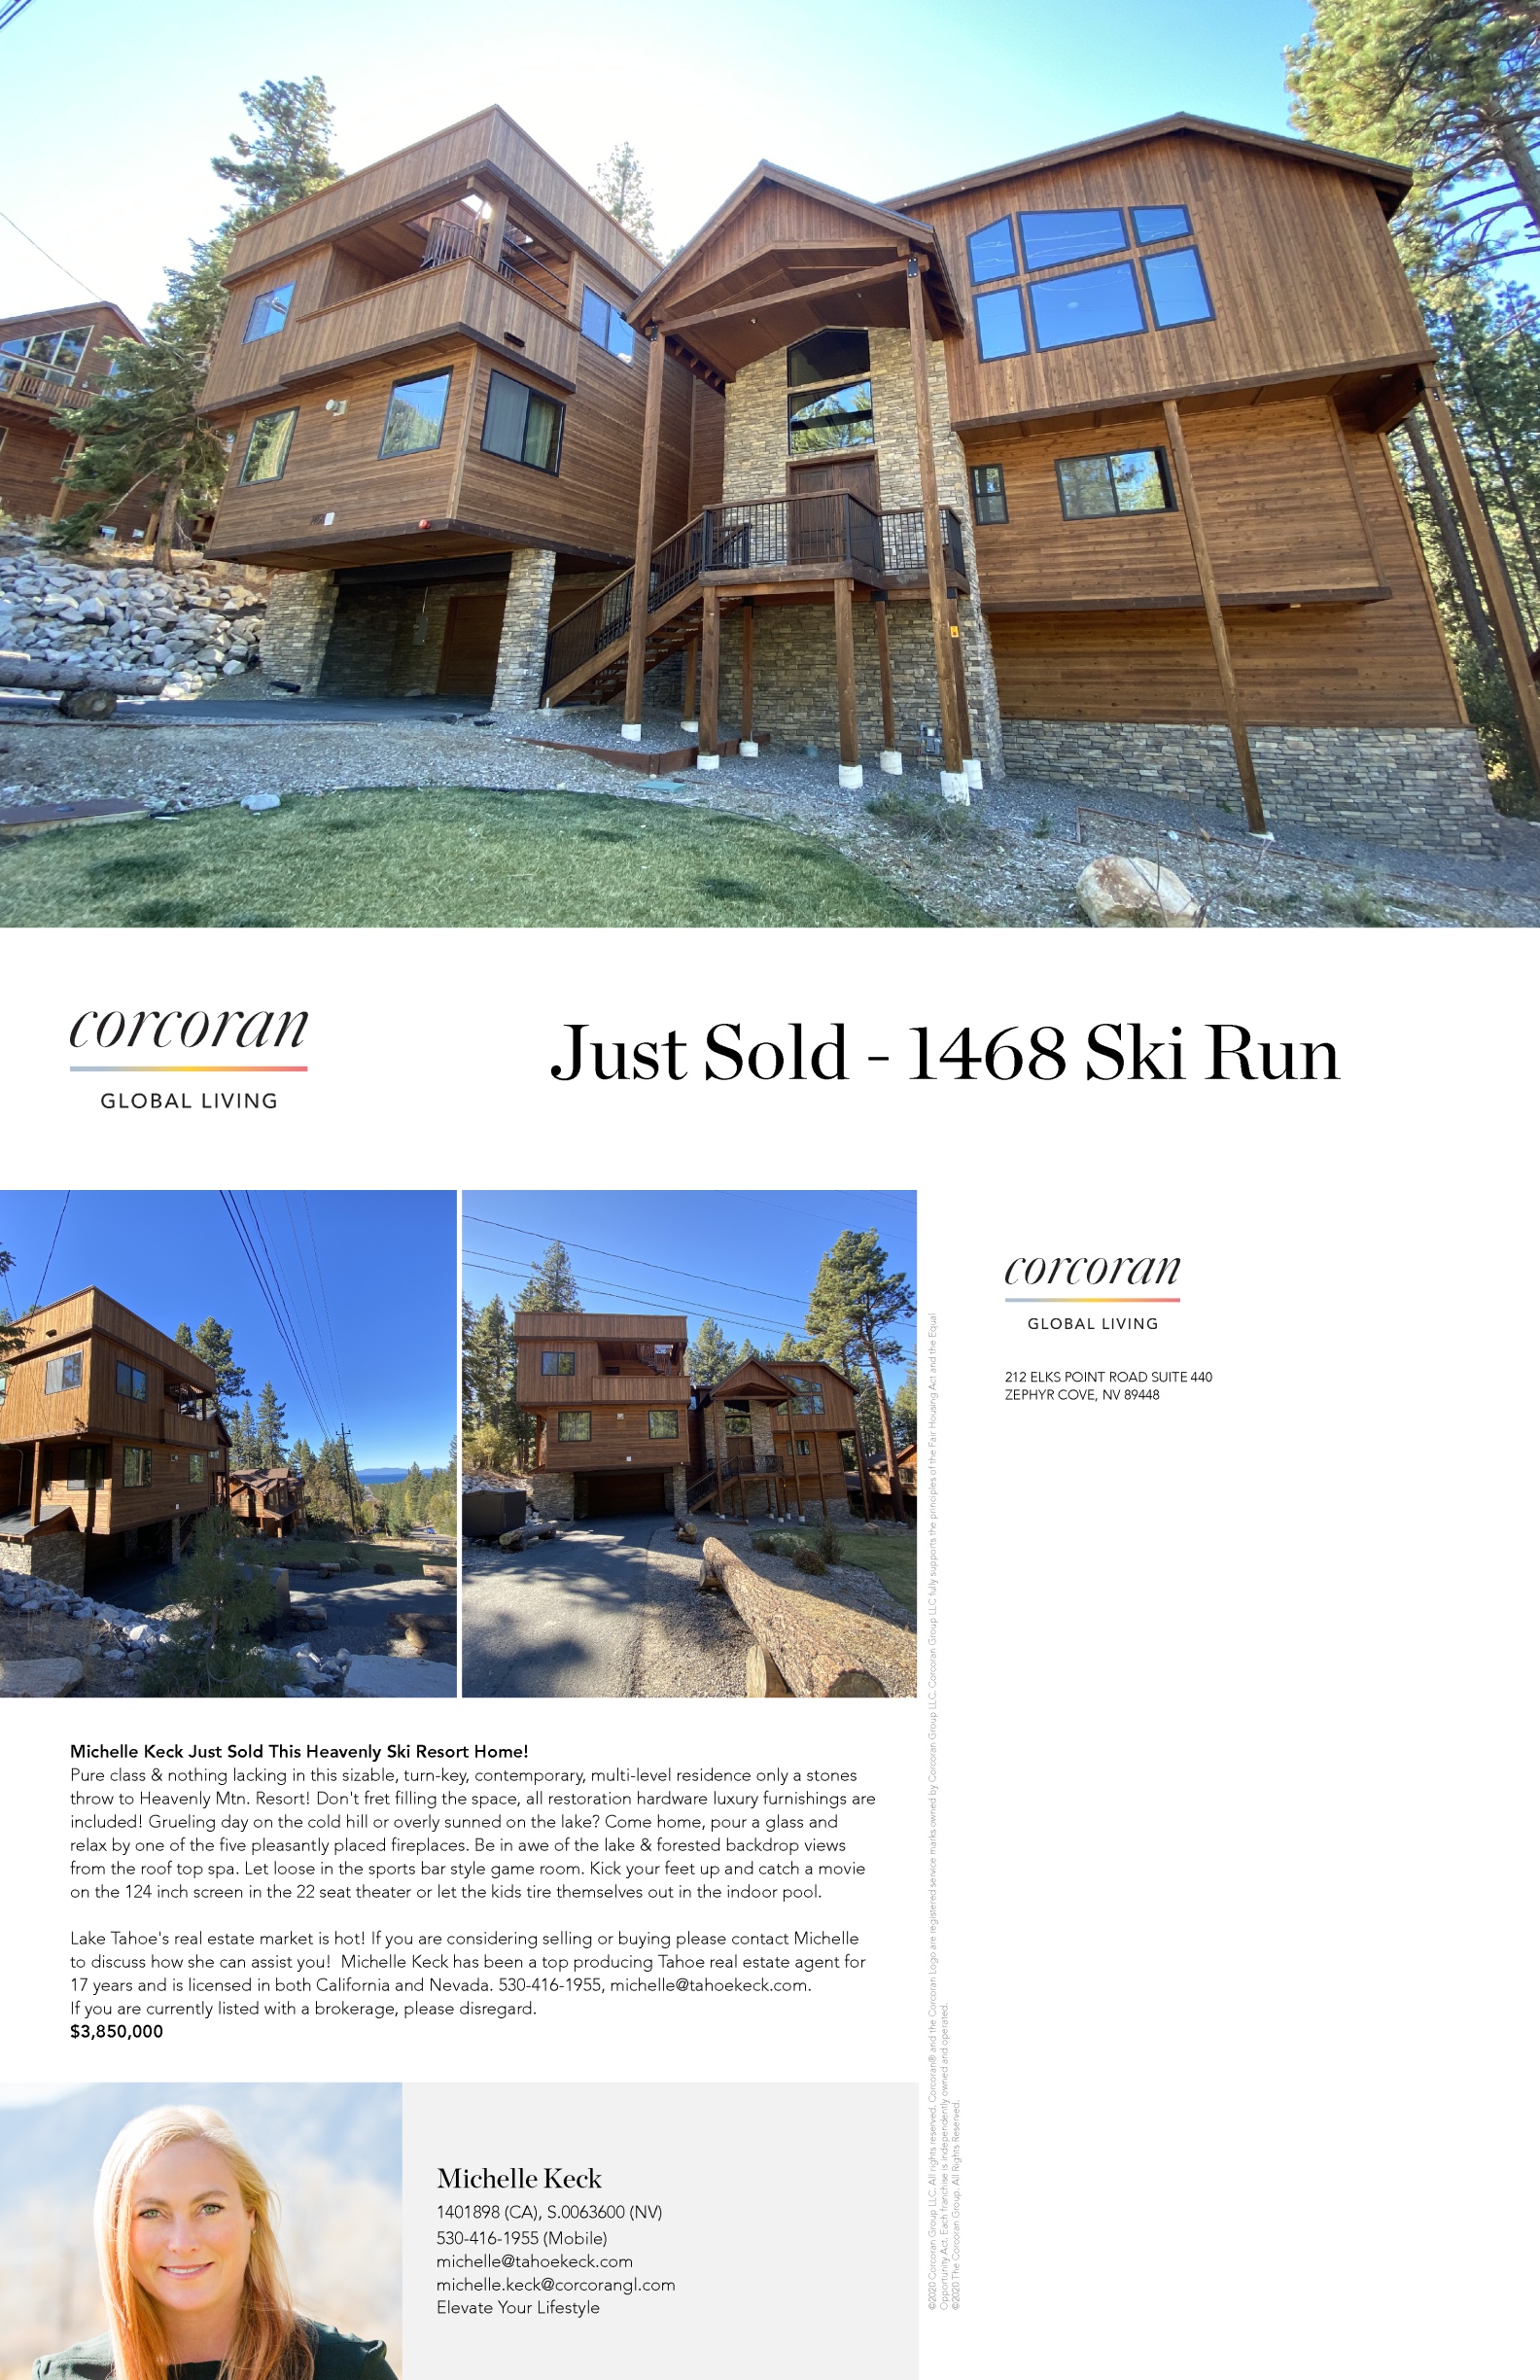 Michelle Keck Realtor in Lake Tahoe- Just Sold!